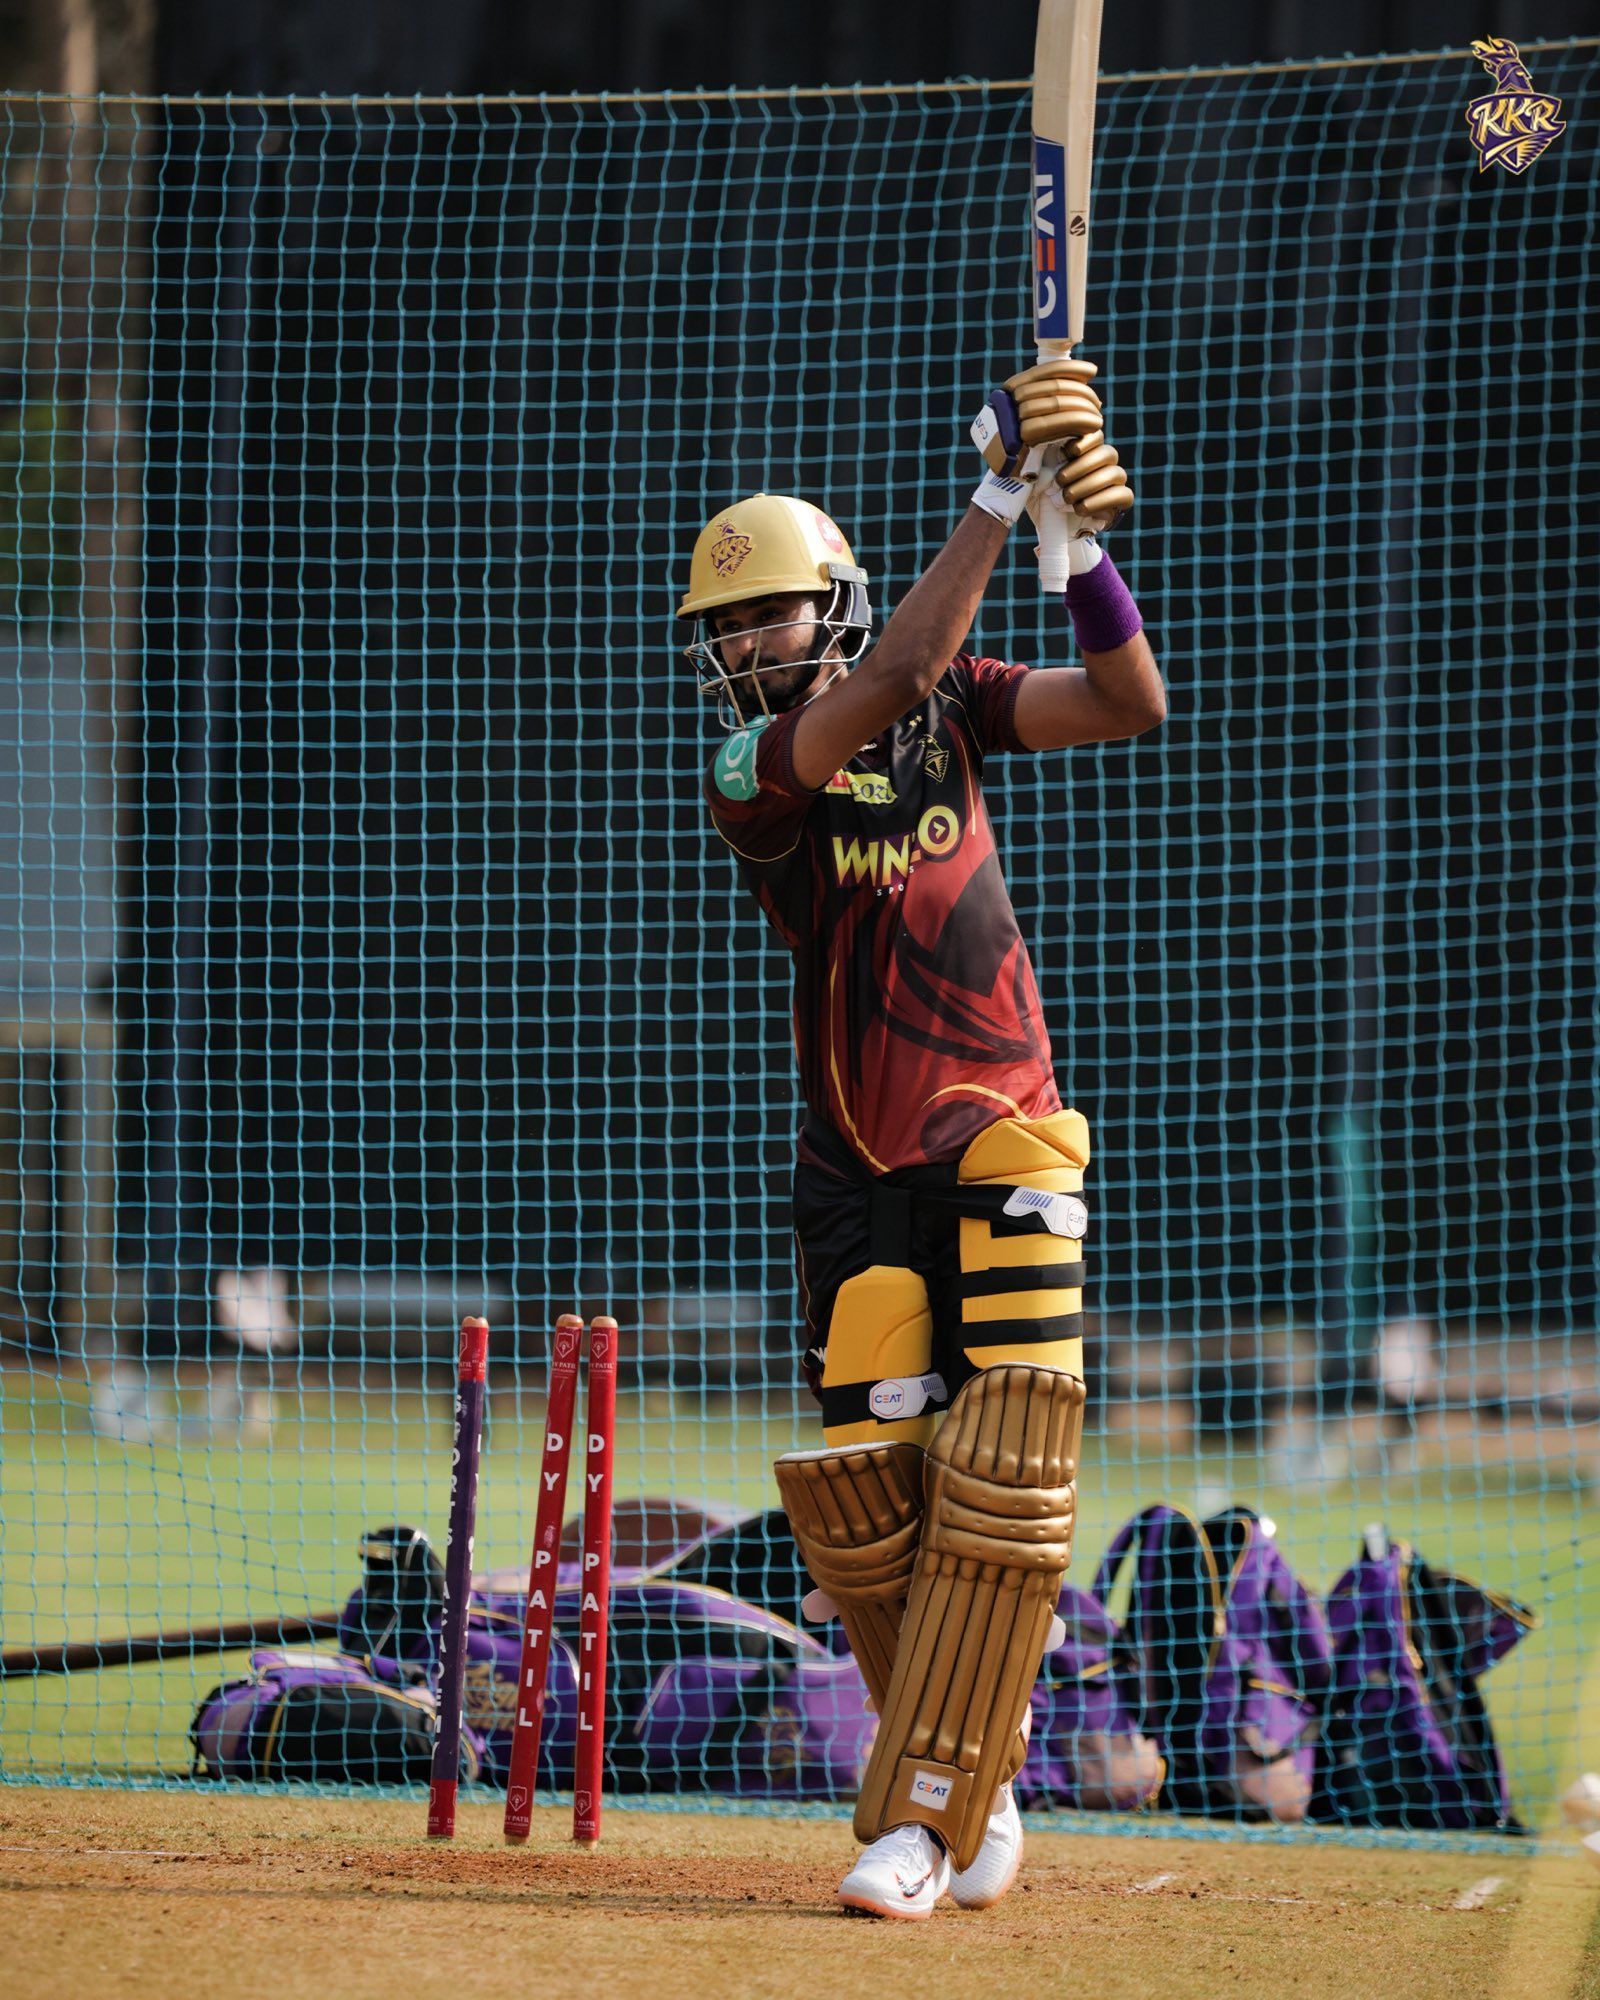 Shreyas Iyer has been sweating it out in the KKR nets ahead of IPL 2022 (Credit: Twitter/KKR)